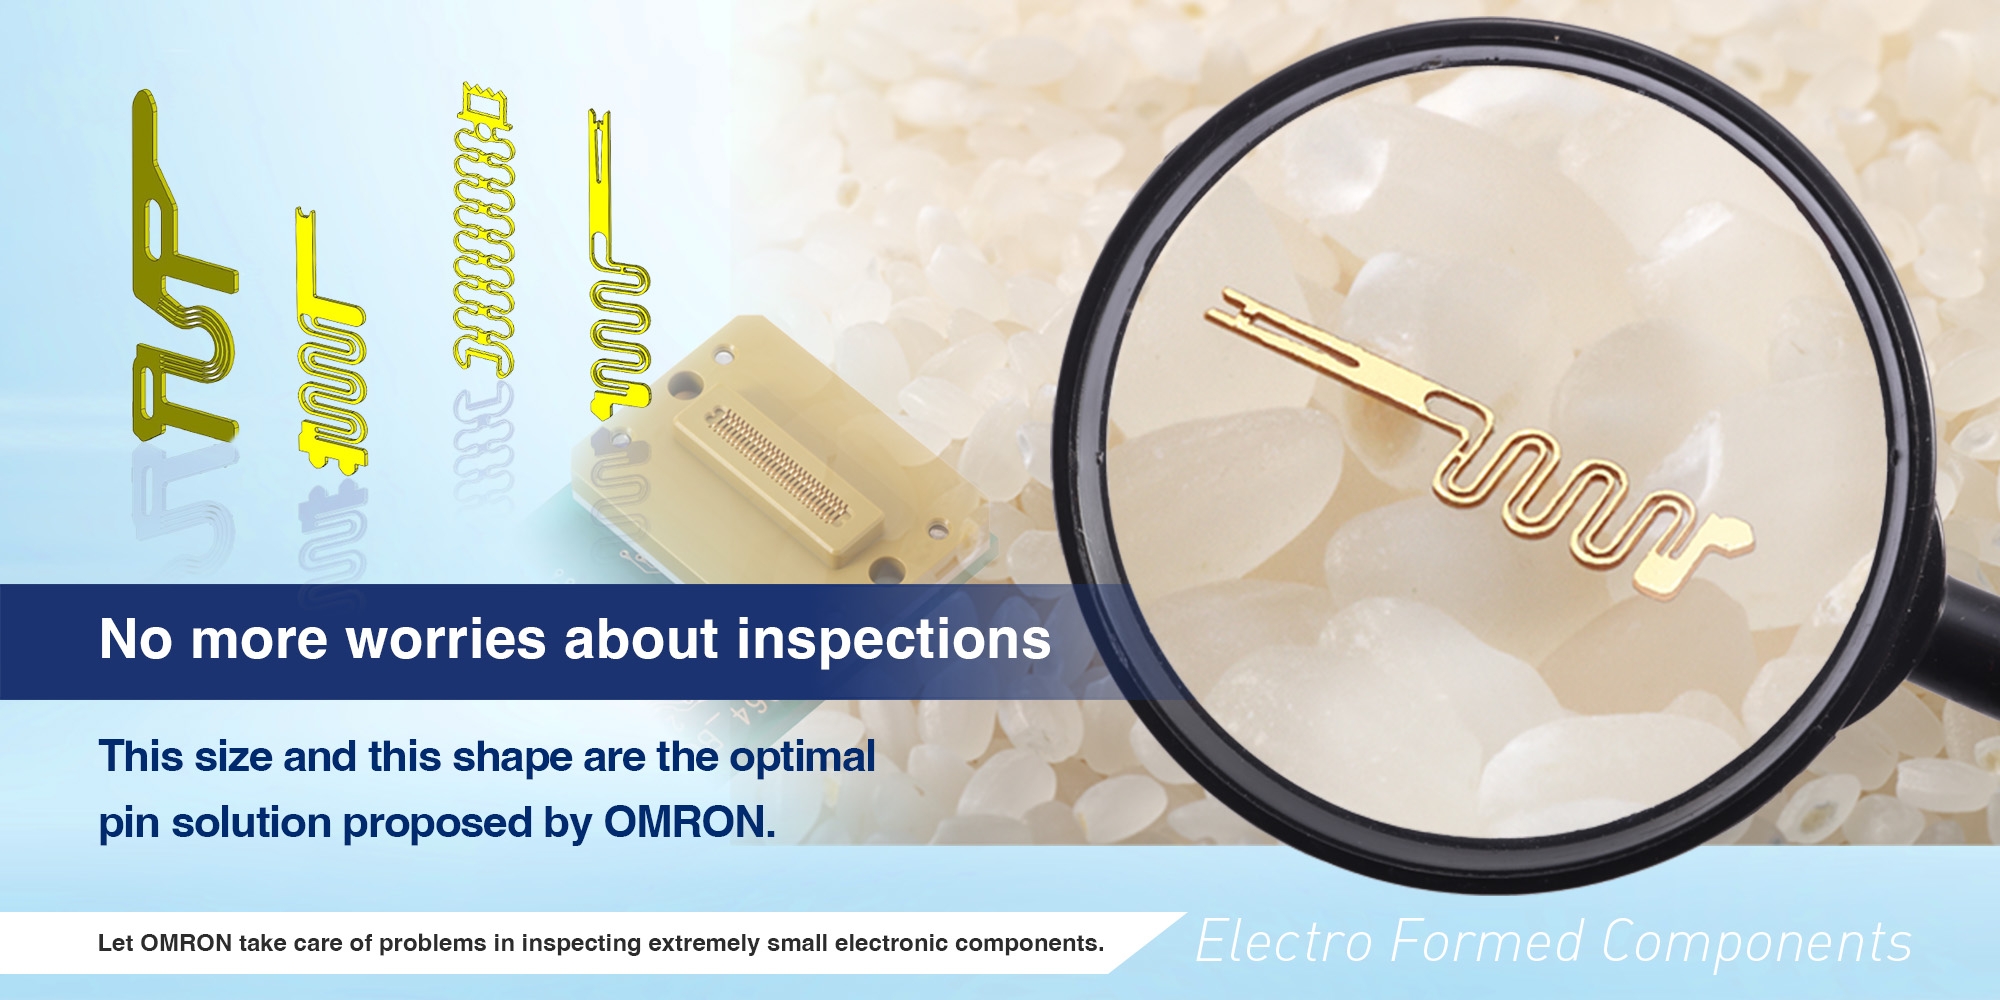 No more worries about inspections. This size and this shape are the optimal pin solution proposed by OMRON. Let OMRON take care of problems in inspecting extremely small electronic components.